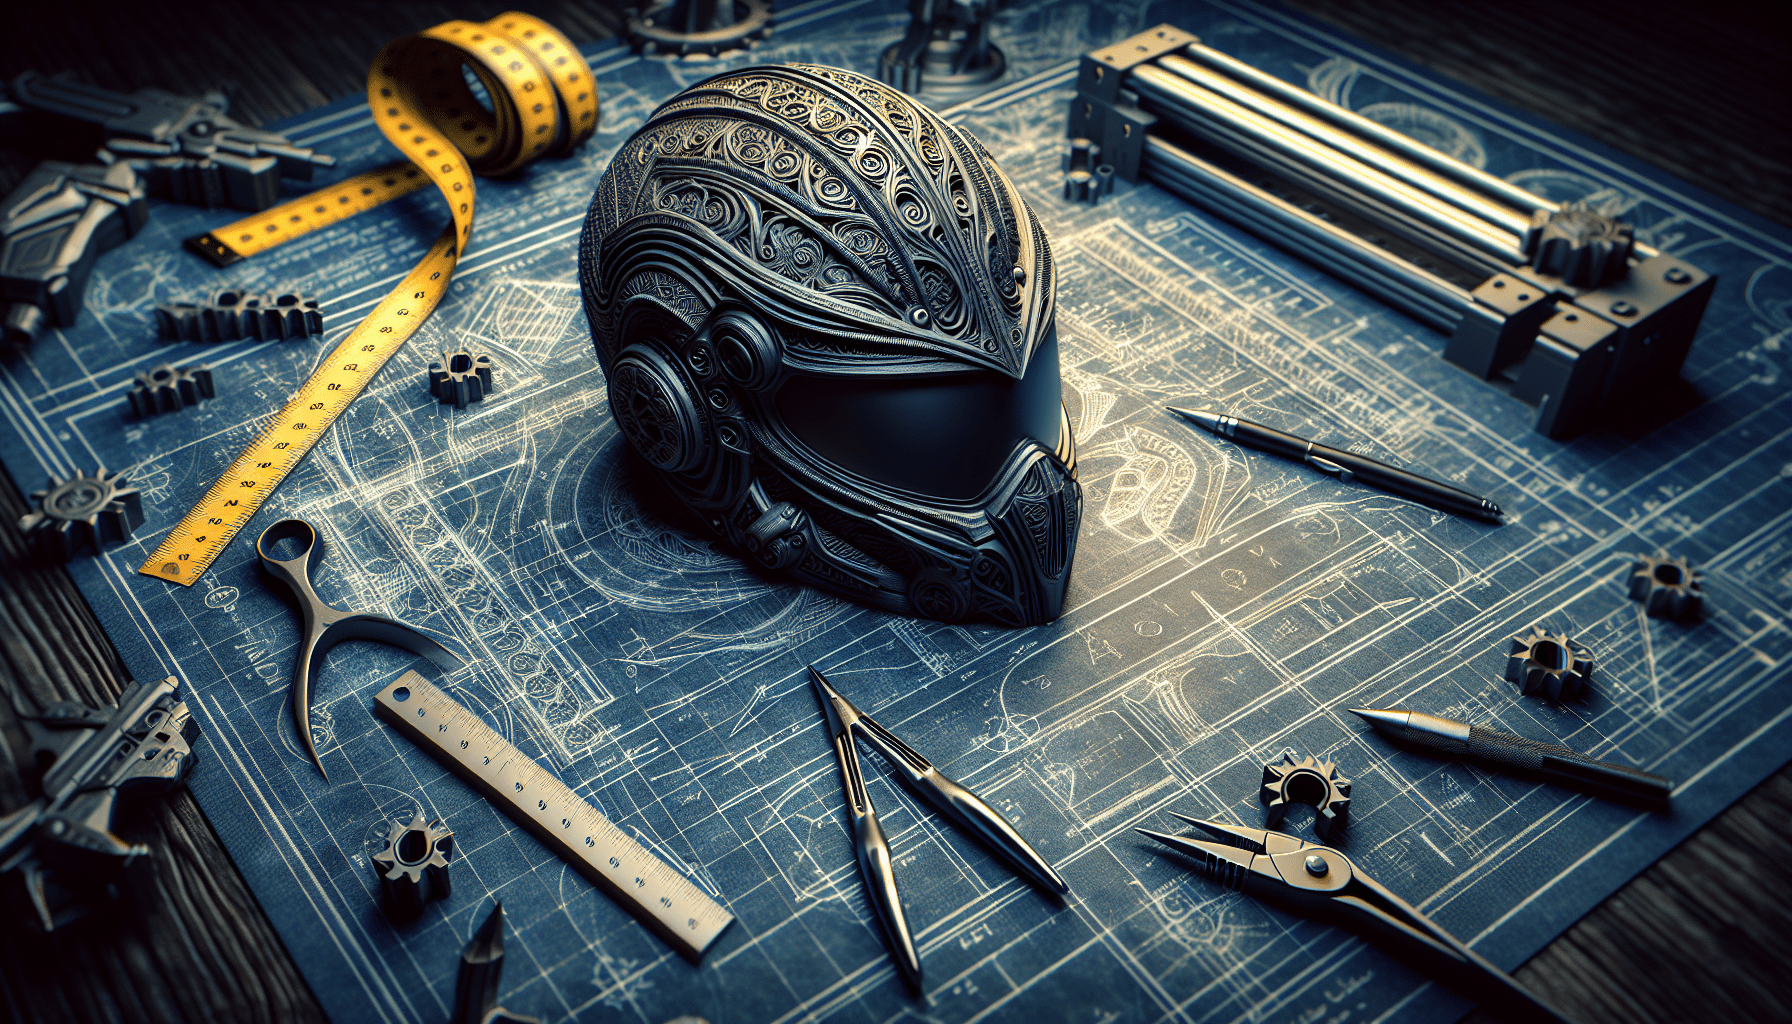 How to Scale 3D Printed Helmets!